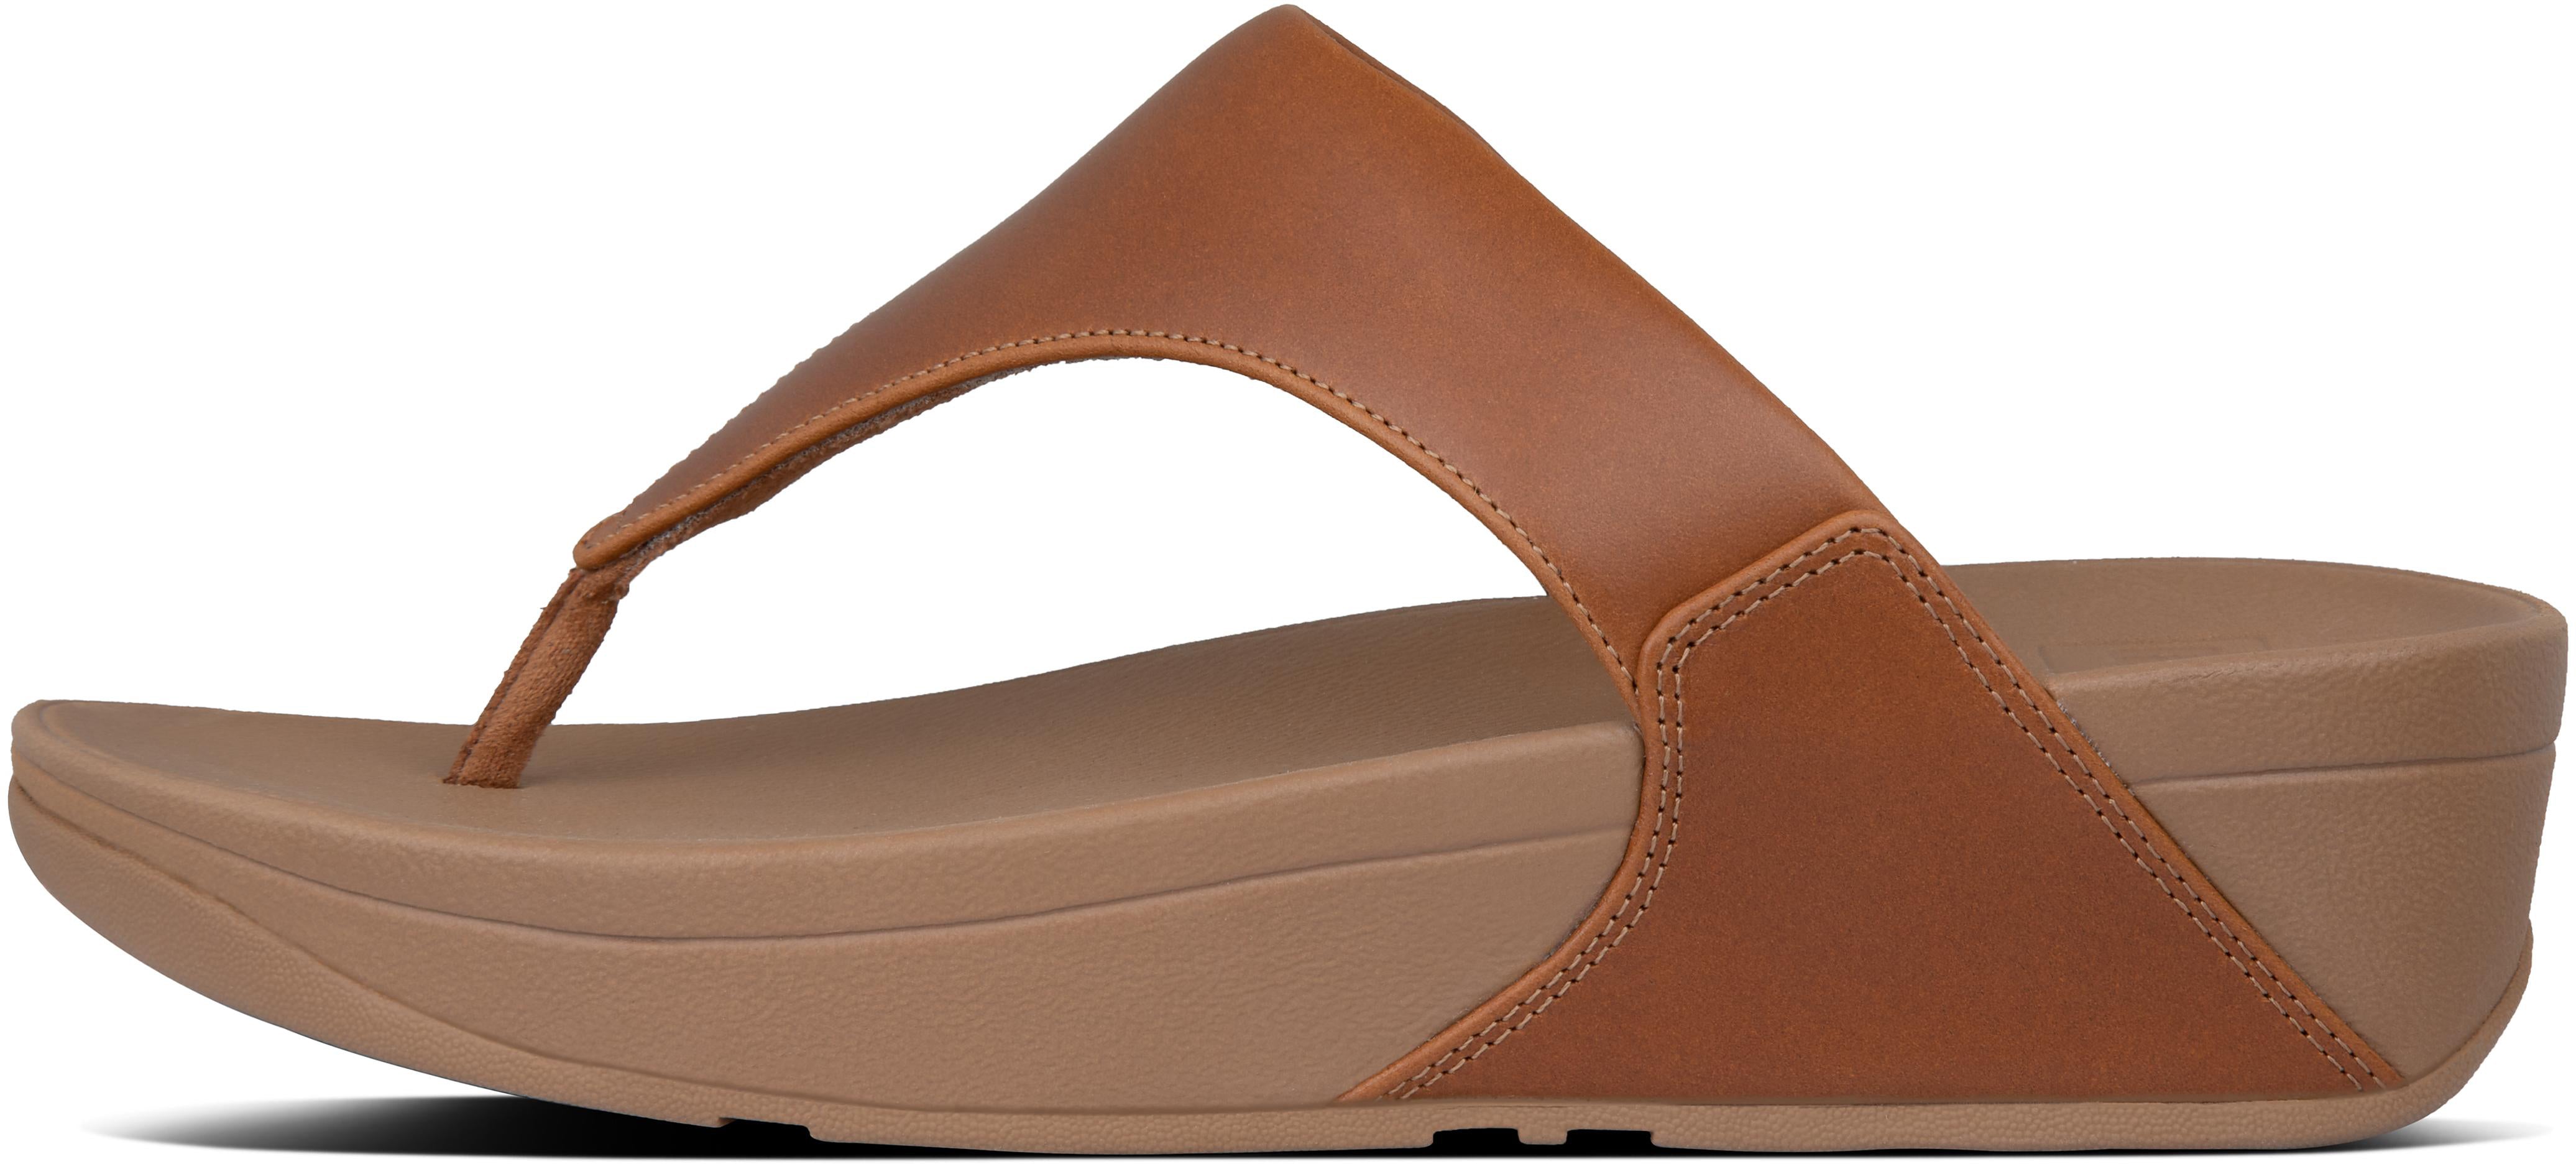 Lulu Leather Toepost in Light Tan from the side